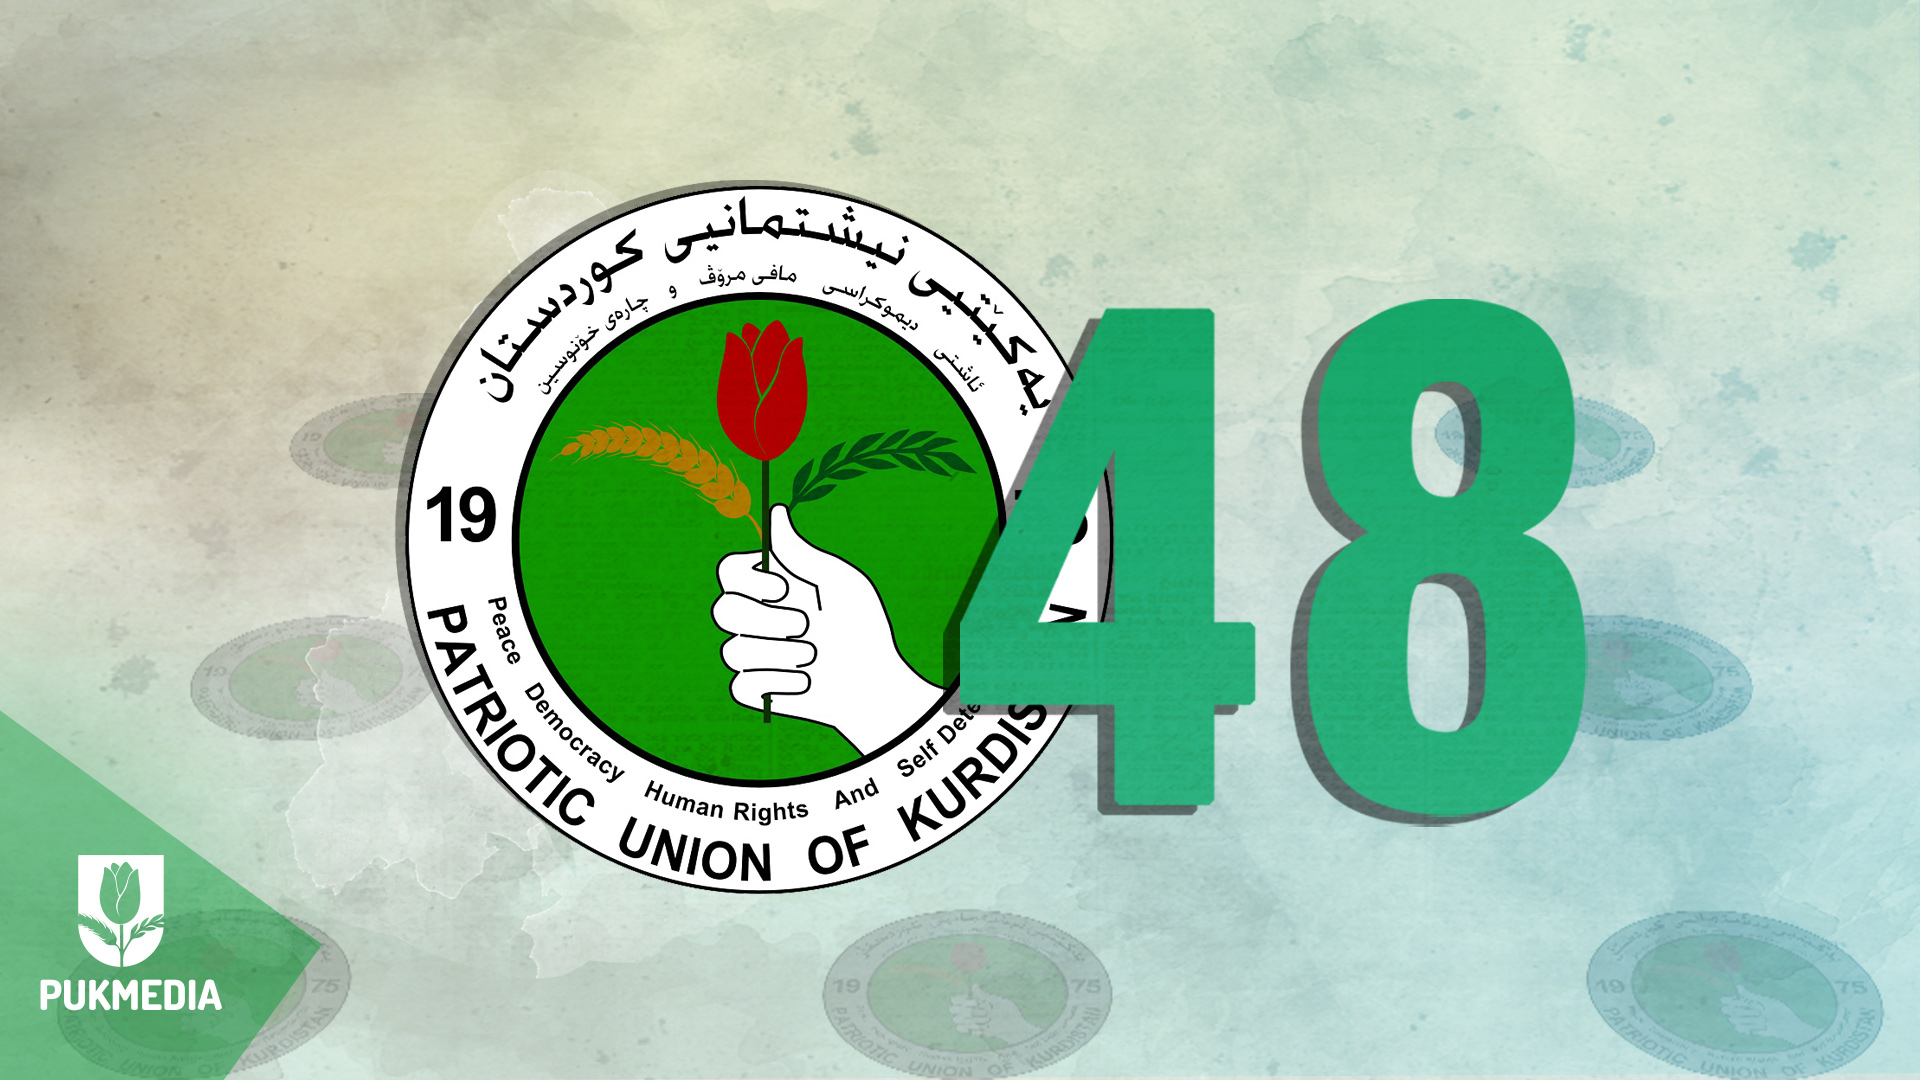  PUK logo and number of years of struggle.